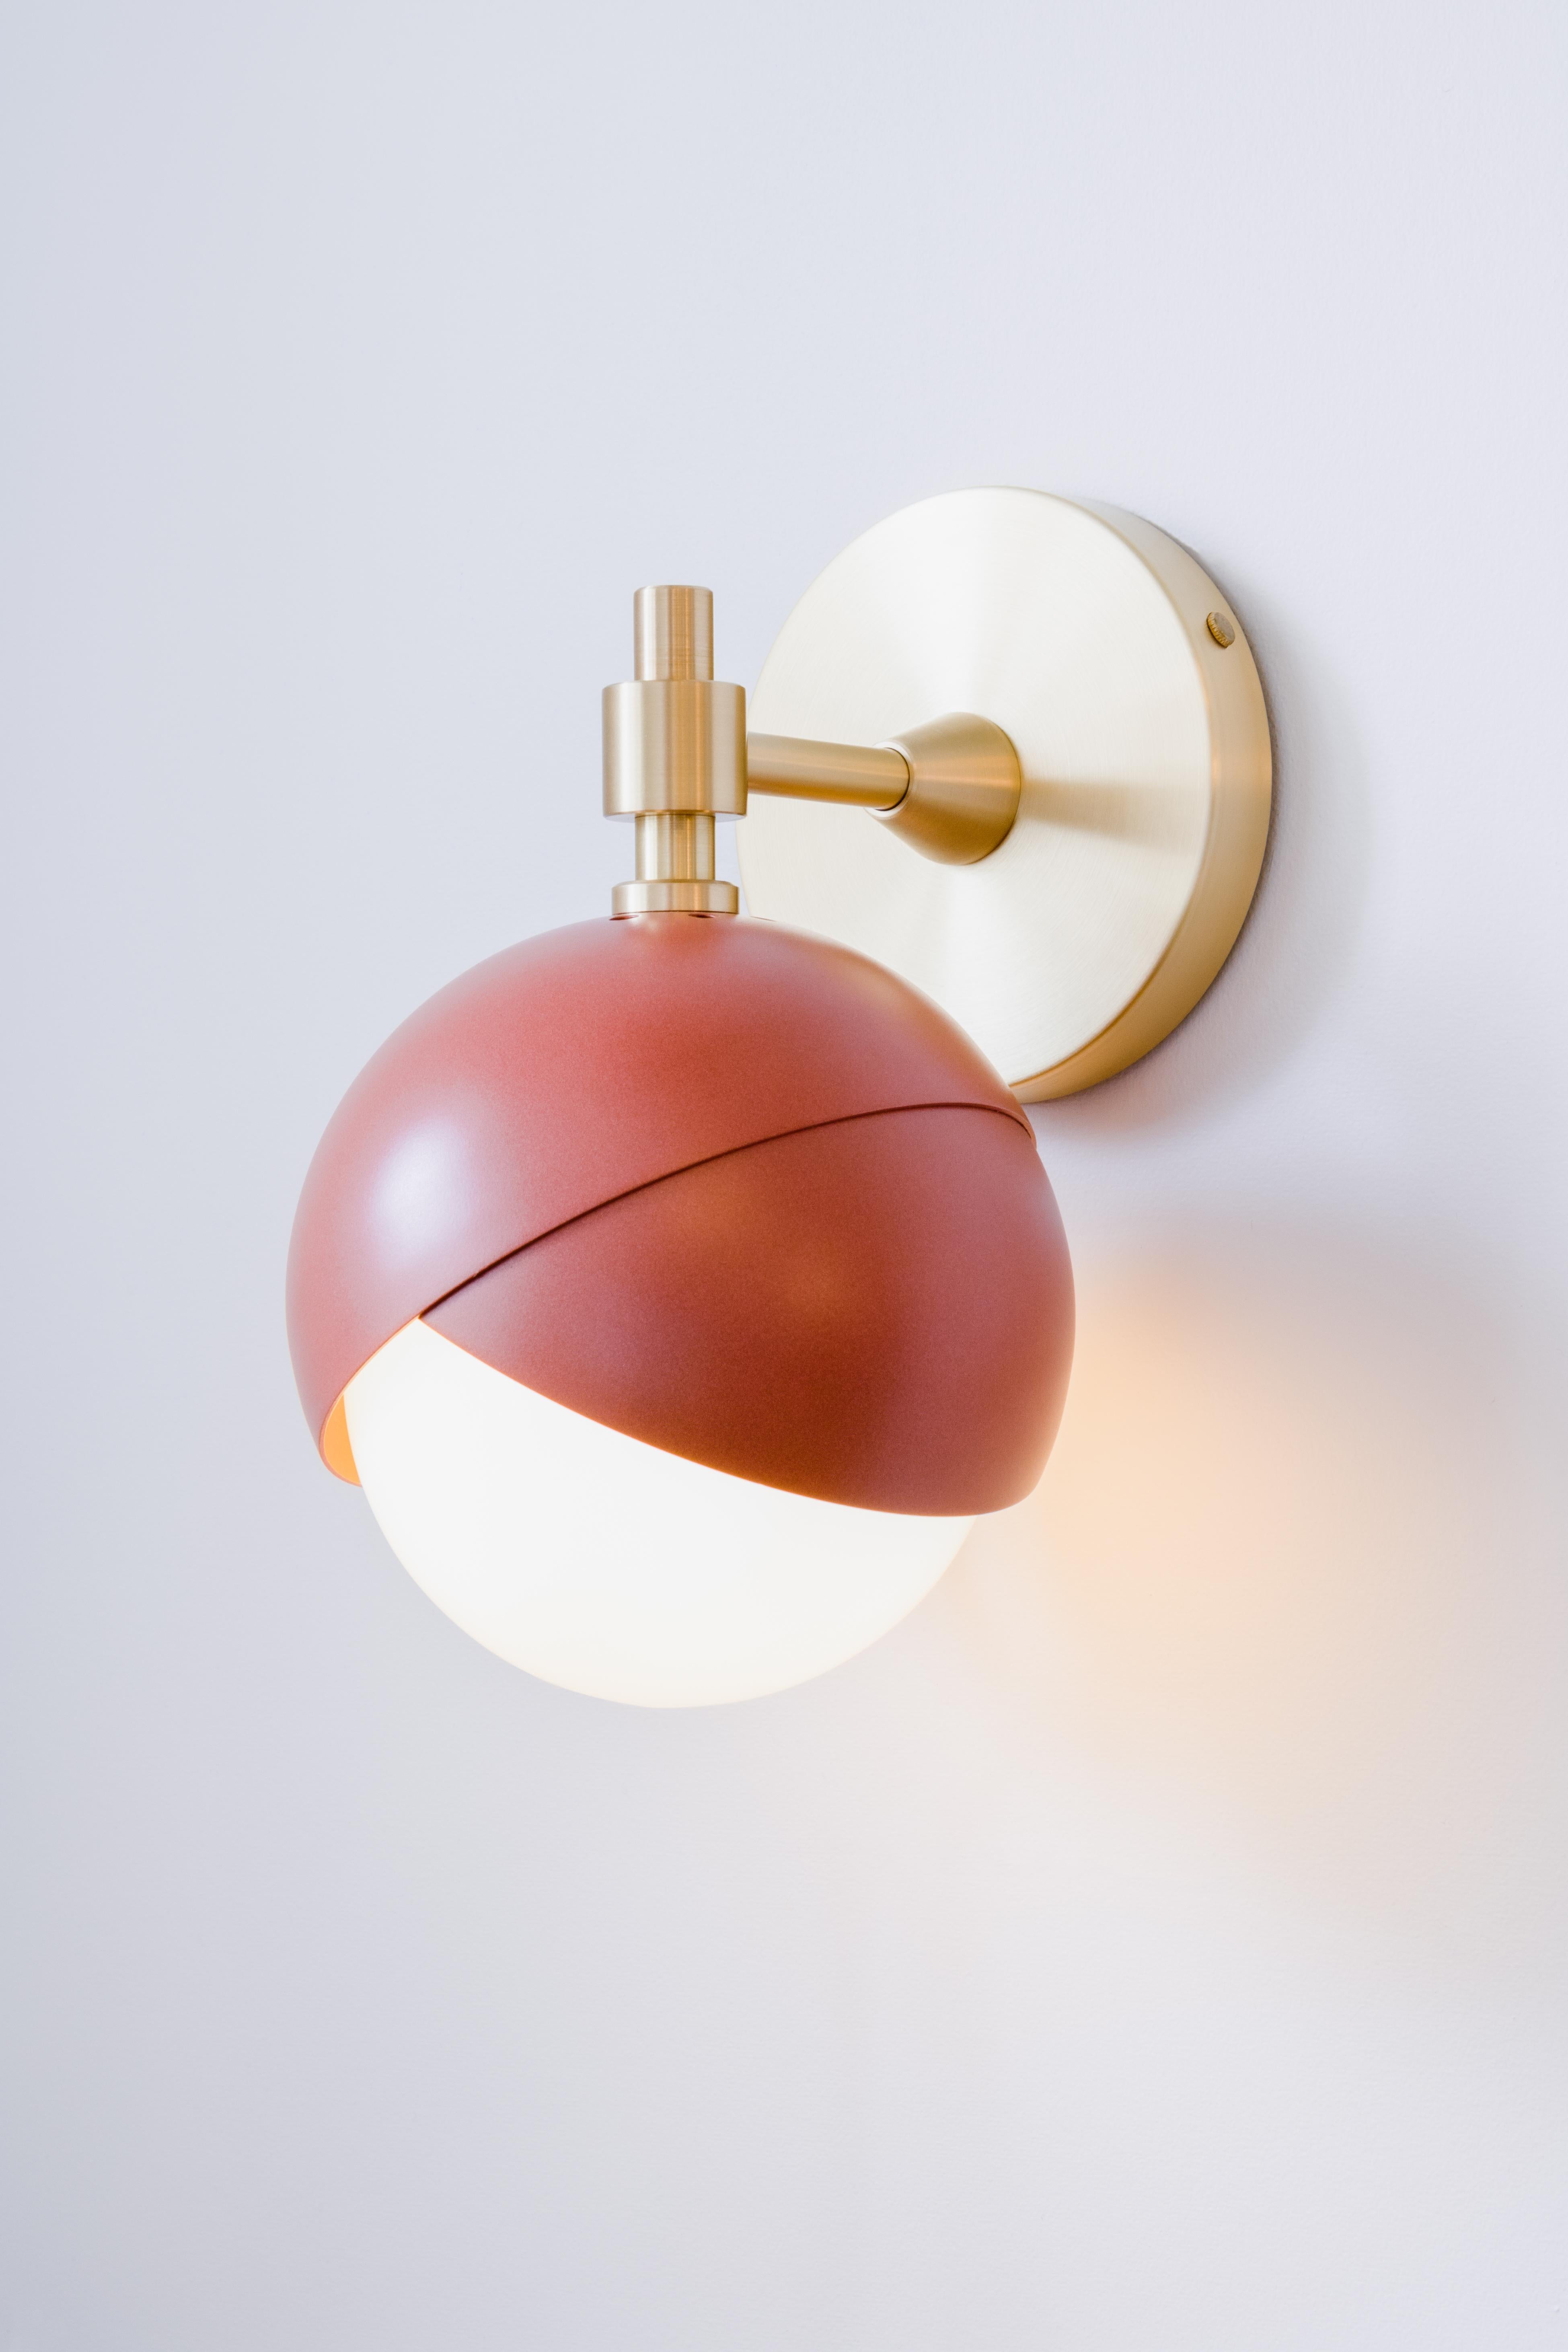 Available in the full range of our signature finishes, the Benedict™ Simple Sconce is sure to be the stunning accent your project has been looking for. Shown here in Adobe Powder Coat and Satin Brass

LAMPING:
Provide Bulb: (1) 5W Candelabra LED